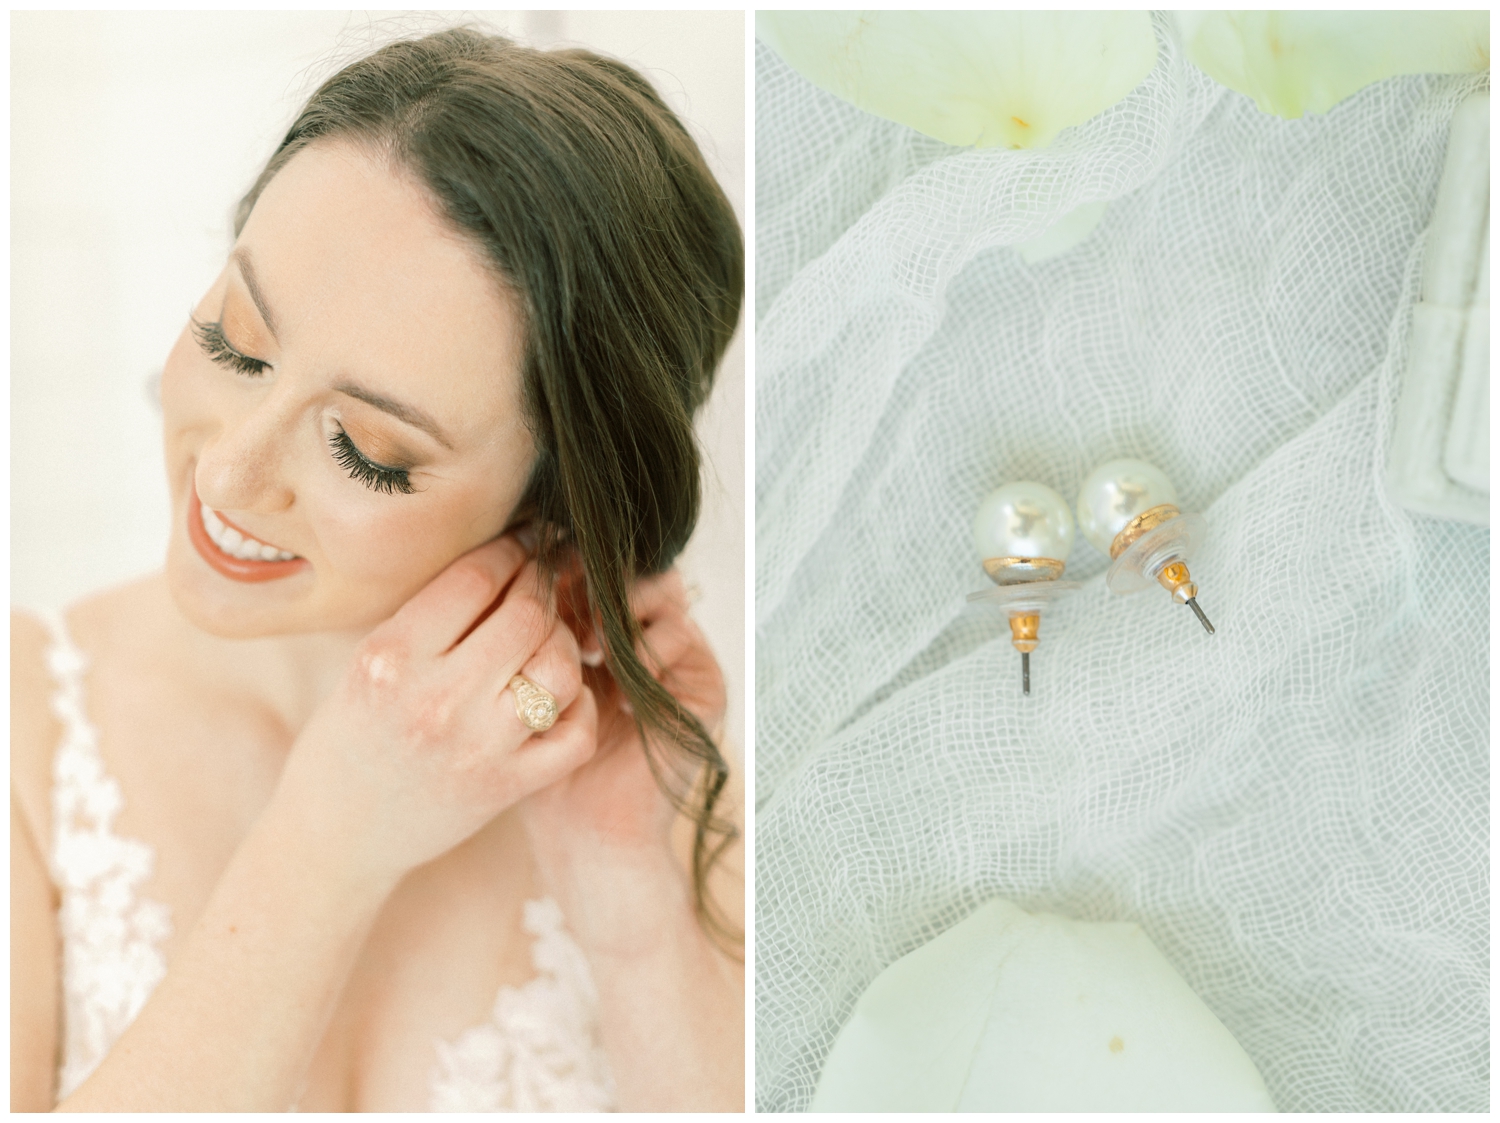 bride putting on earrings on wedding day